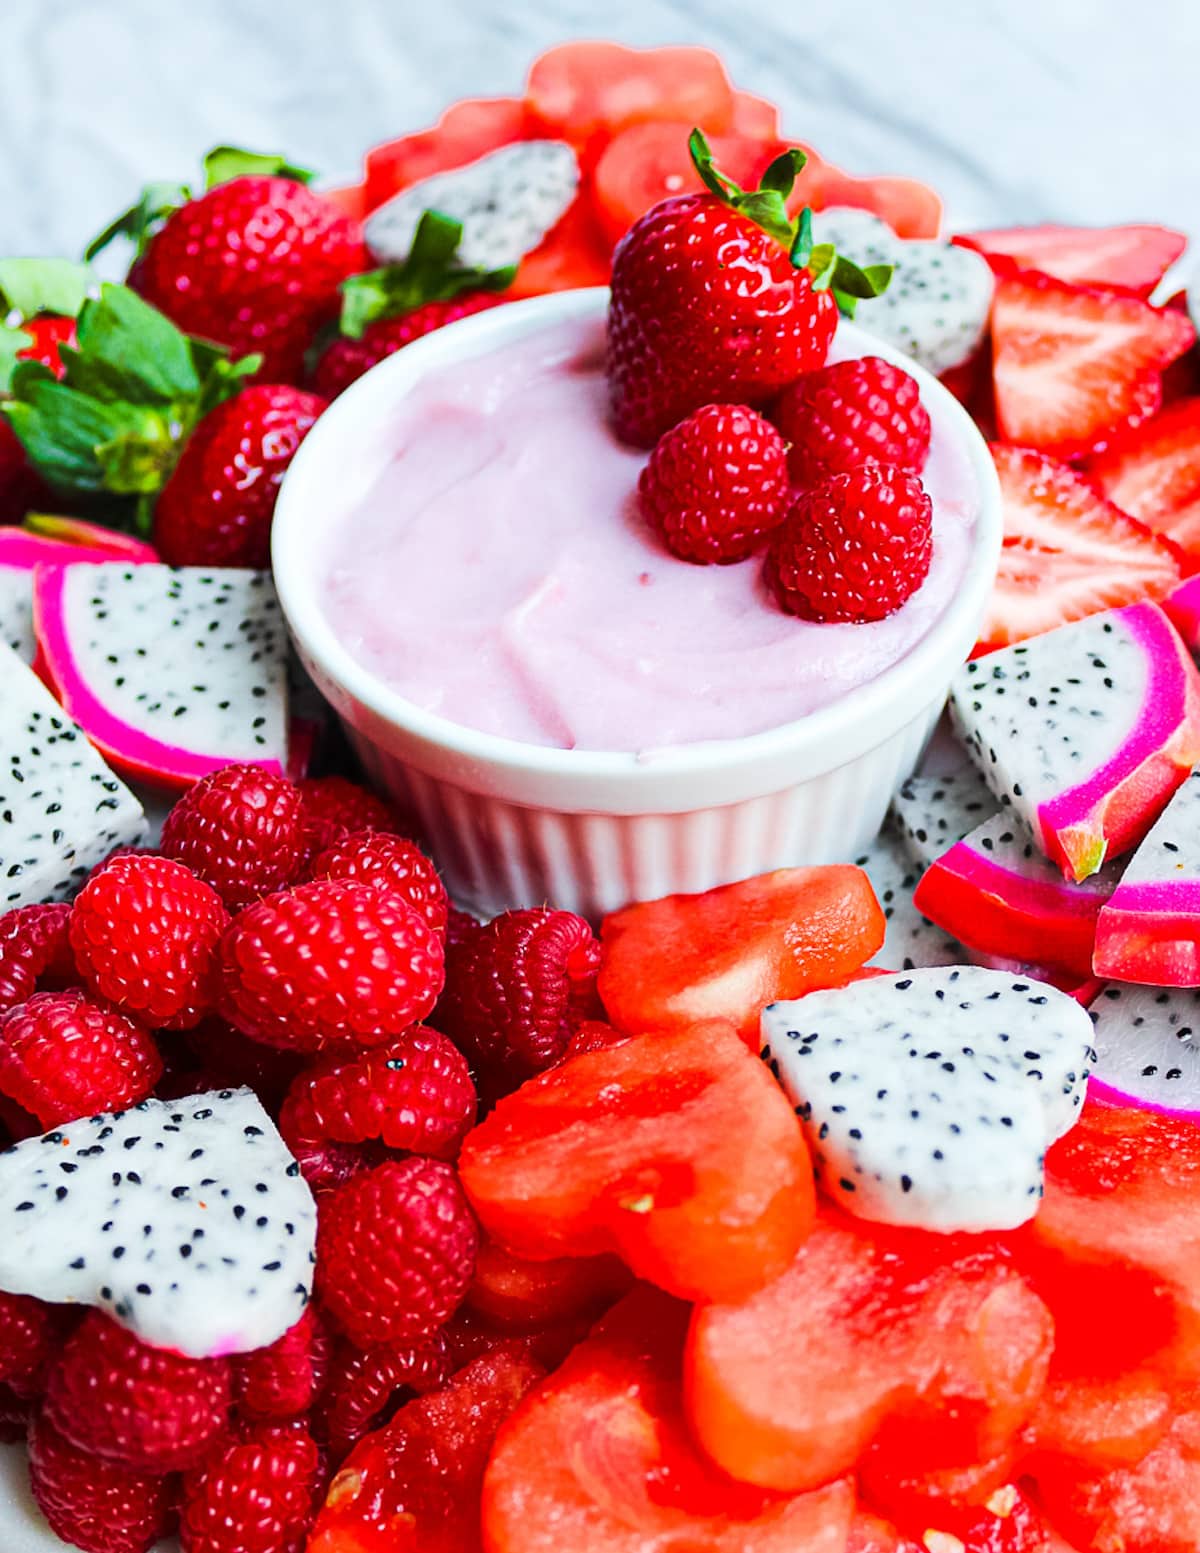 A platter of dragonfruit, strawberries, watermelon, and raspberries with a small white dish filled with a homemade strawberry fruit dip.